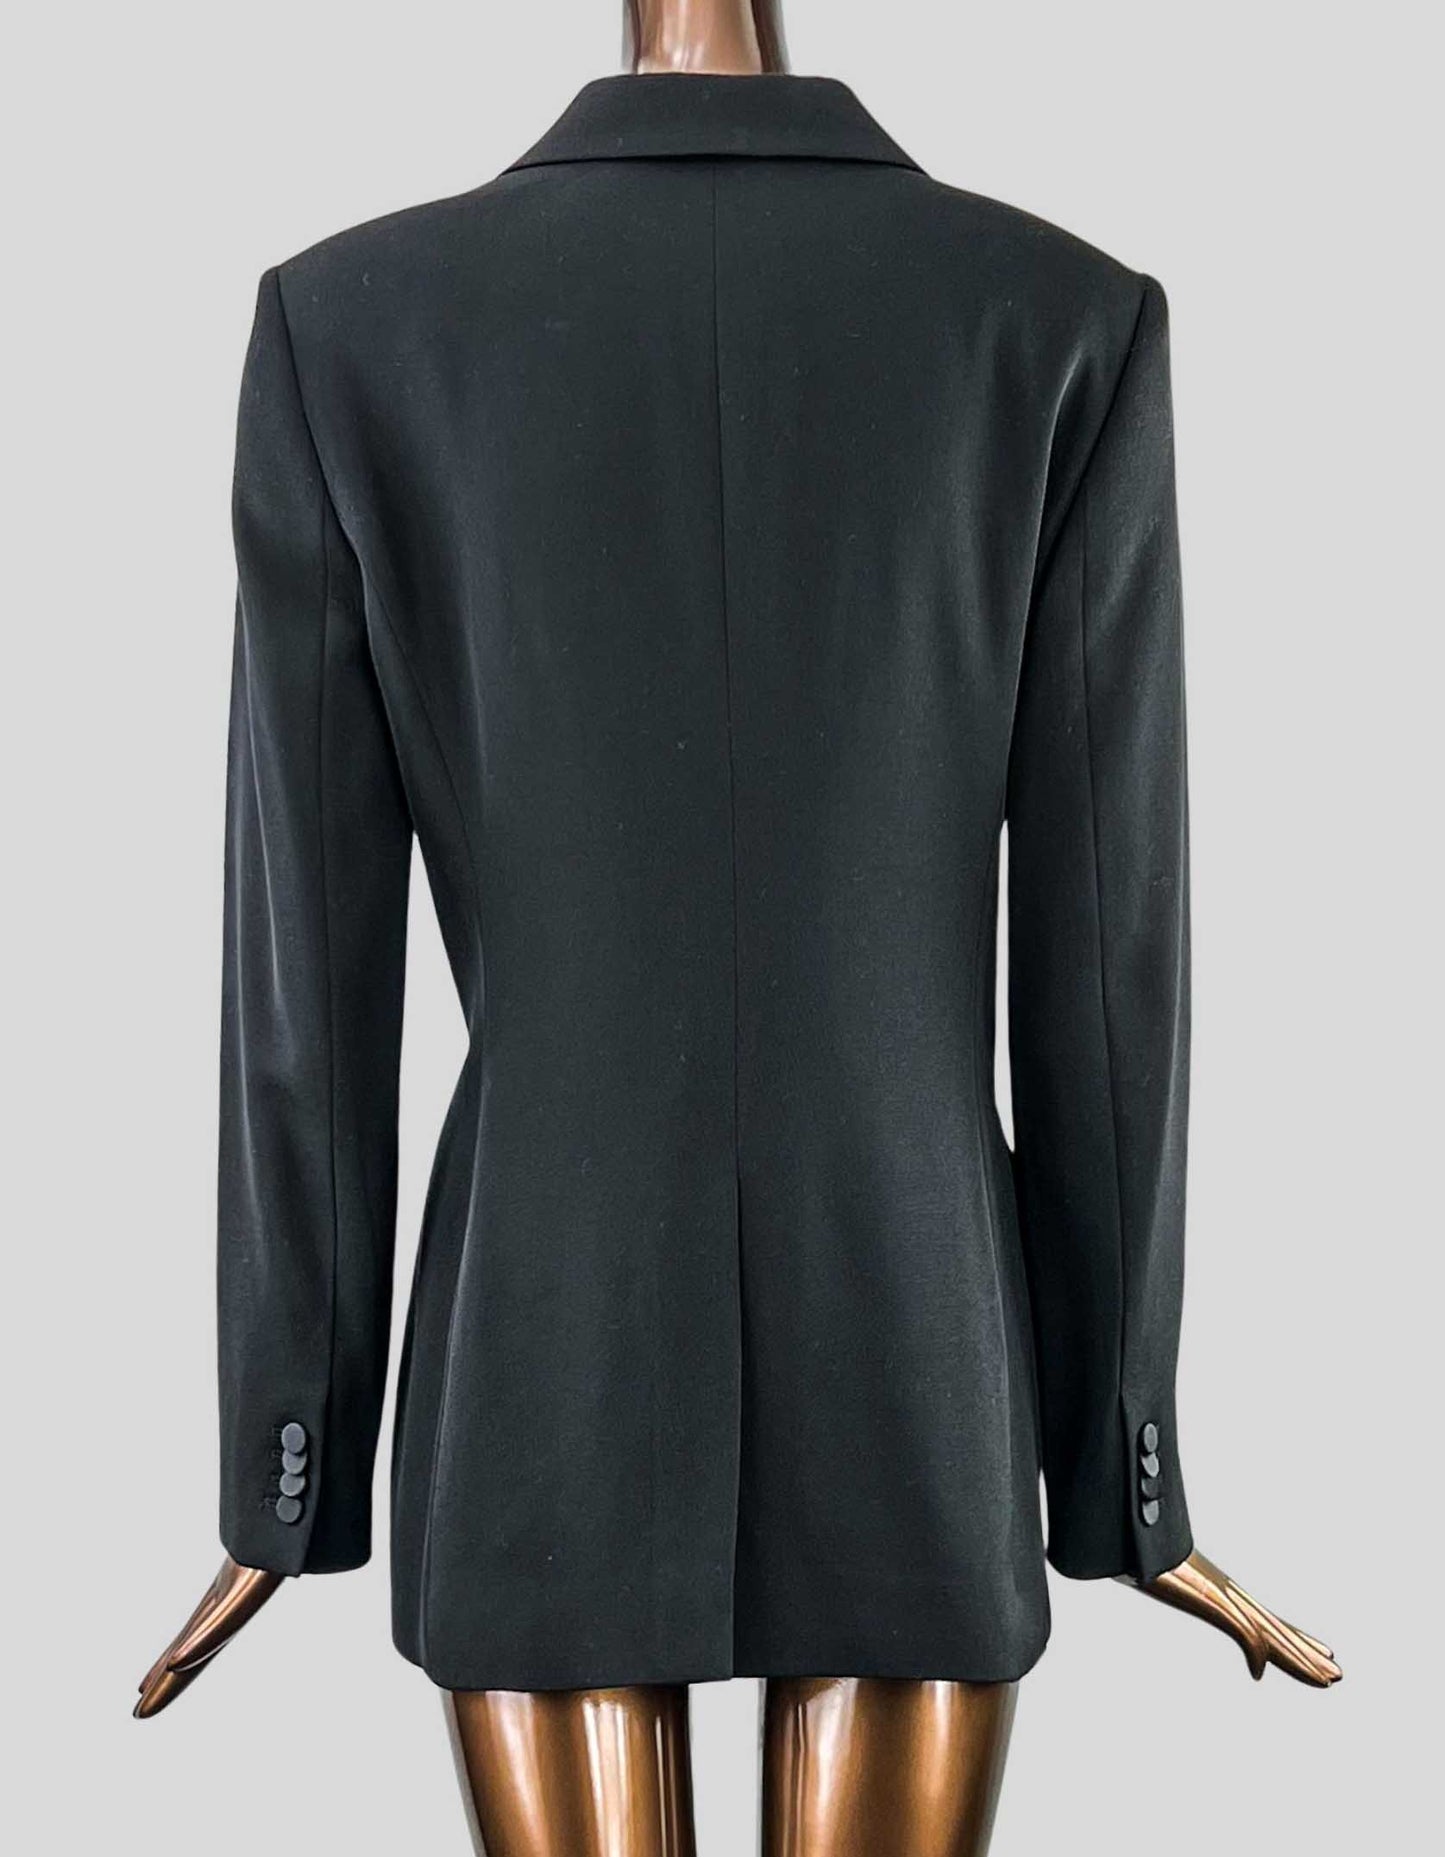 PAUL SMITH Double-Breasted Tuxedo Blazer With Satin Details - 44 IT | 8 US